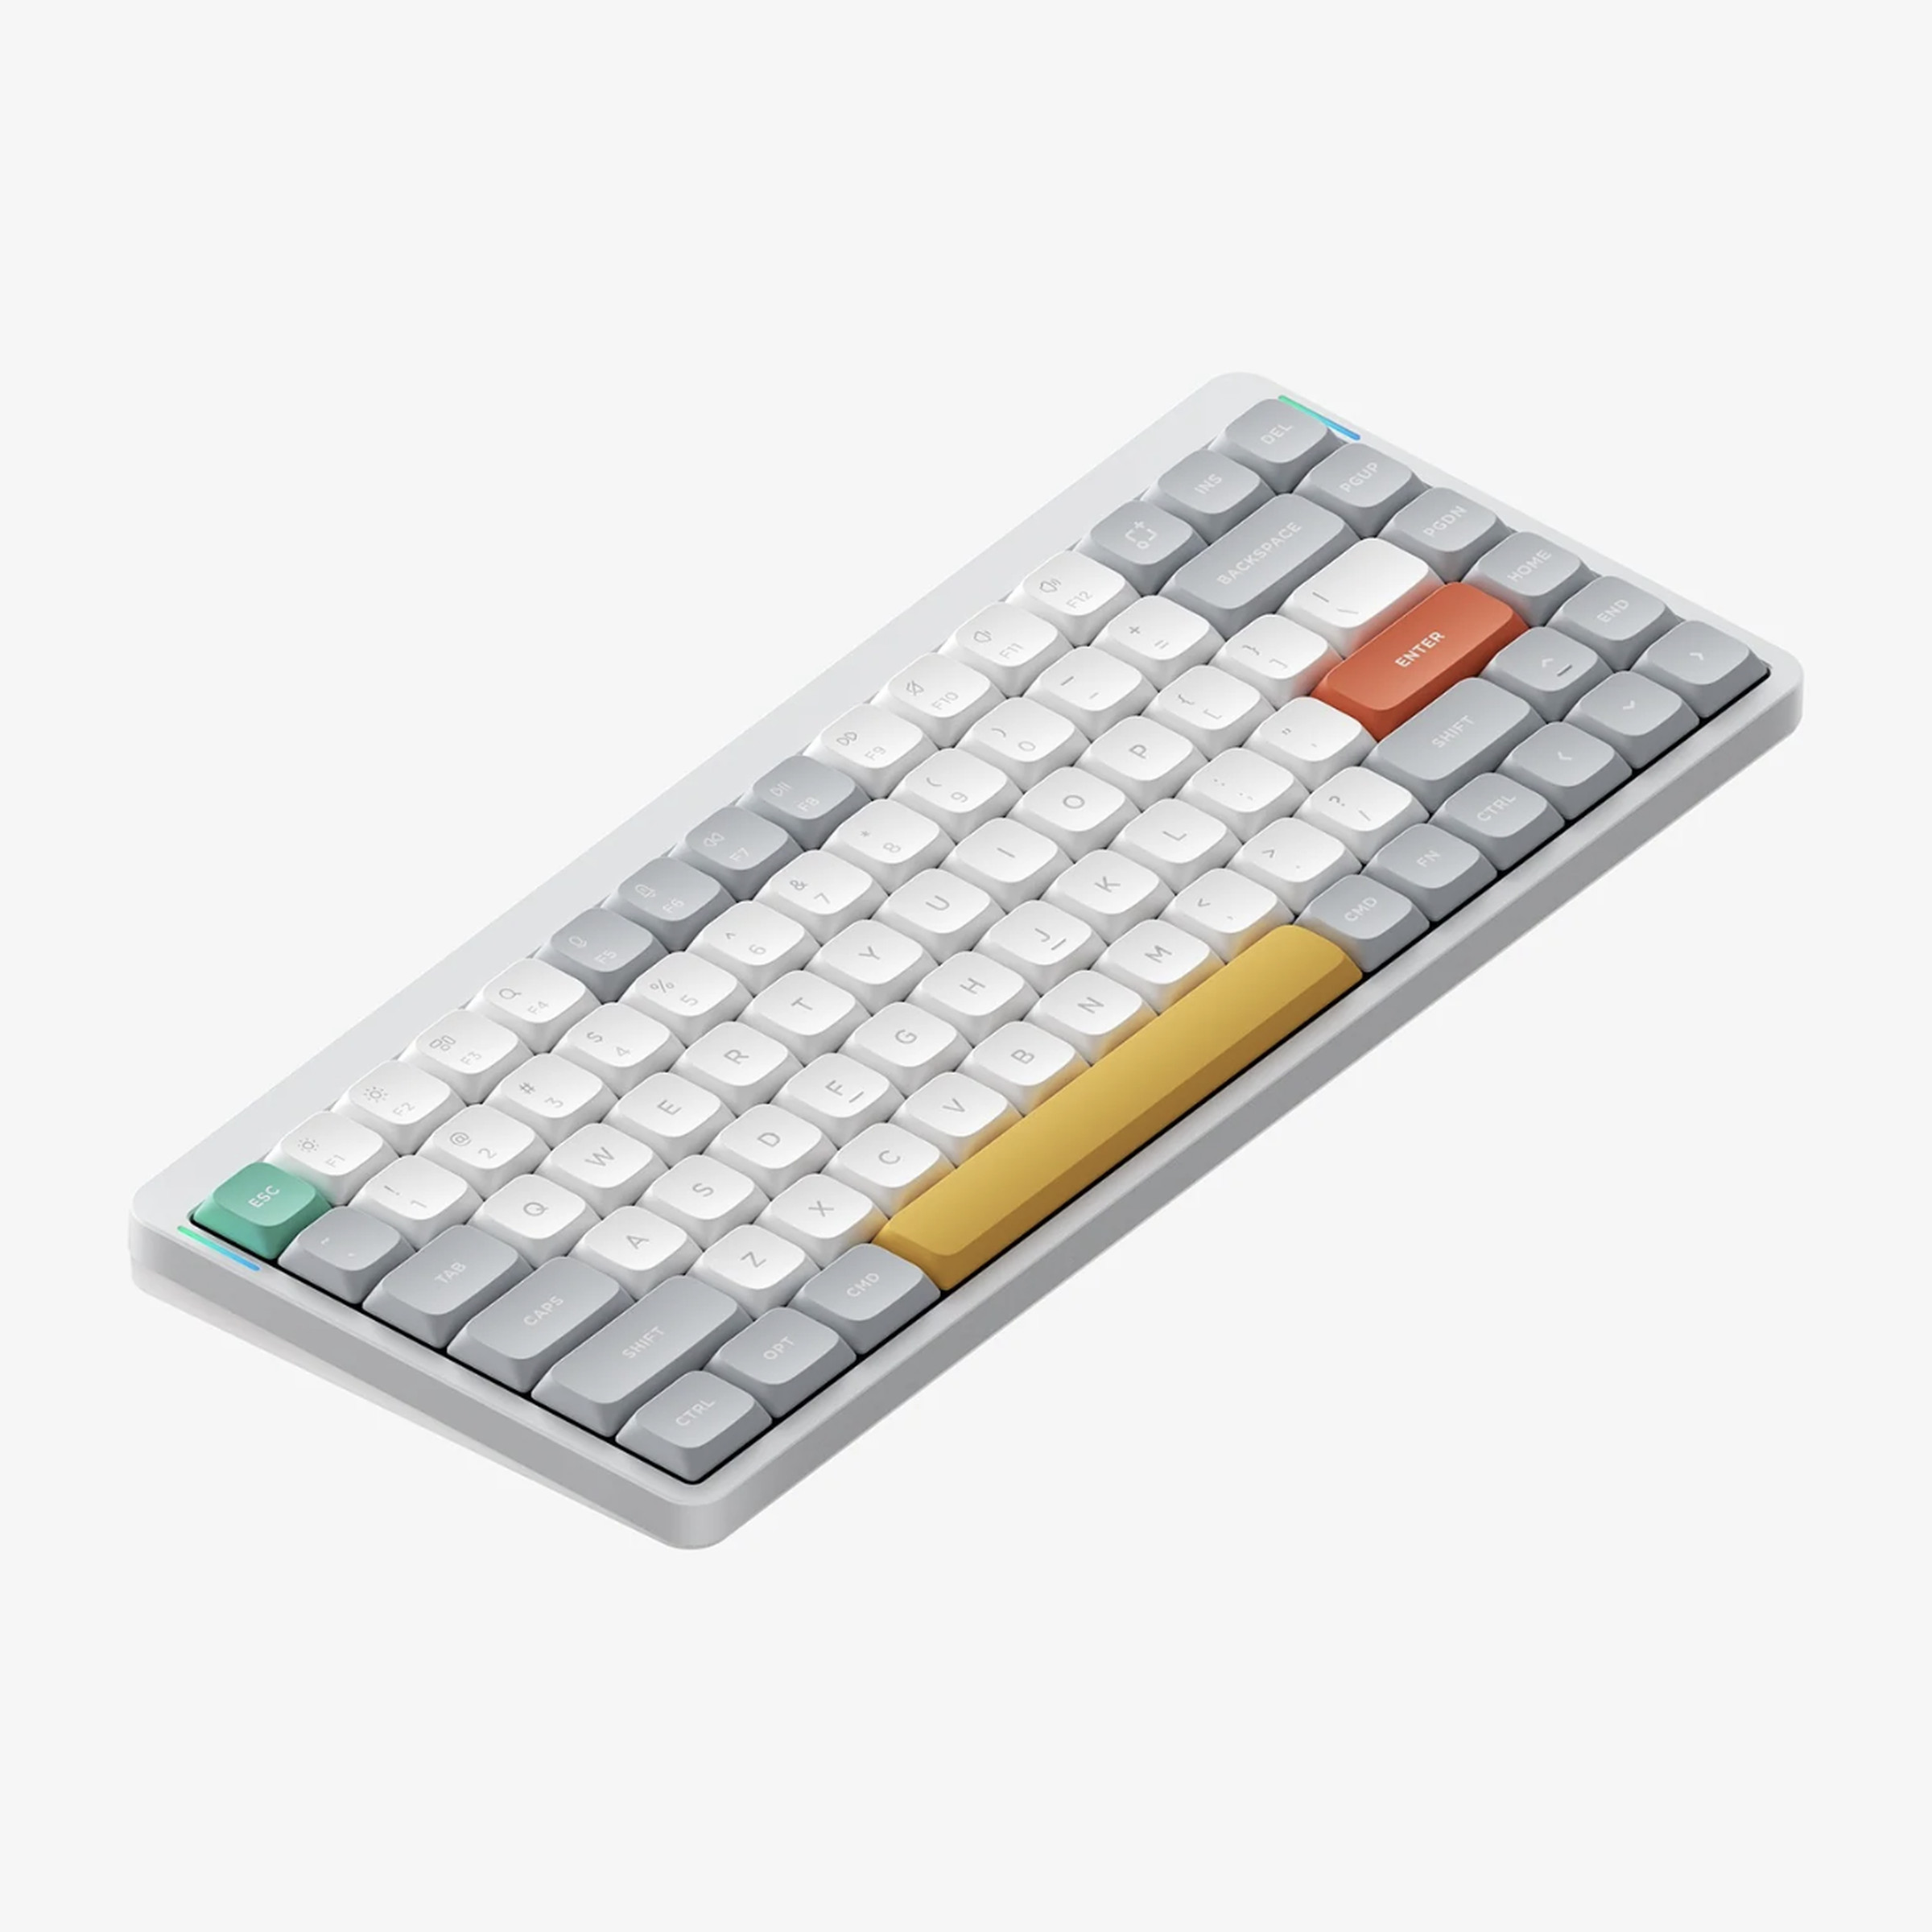 Keyboard with white, gray, red, and yellow keys.